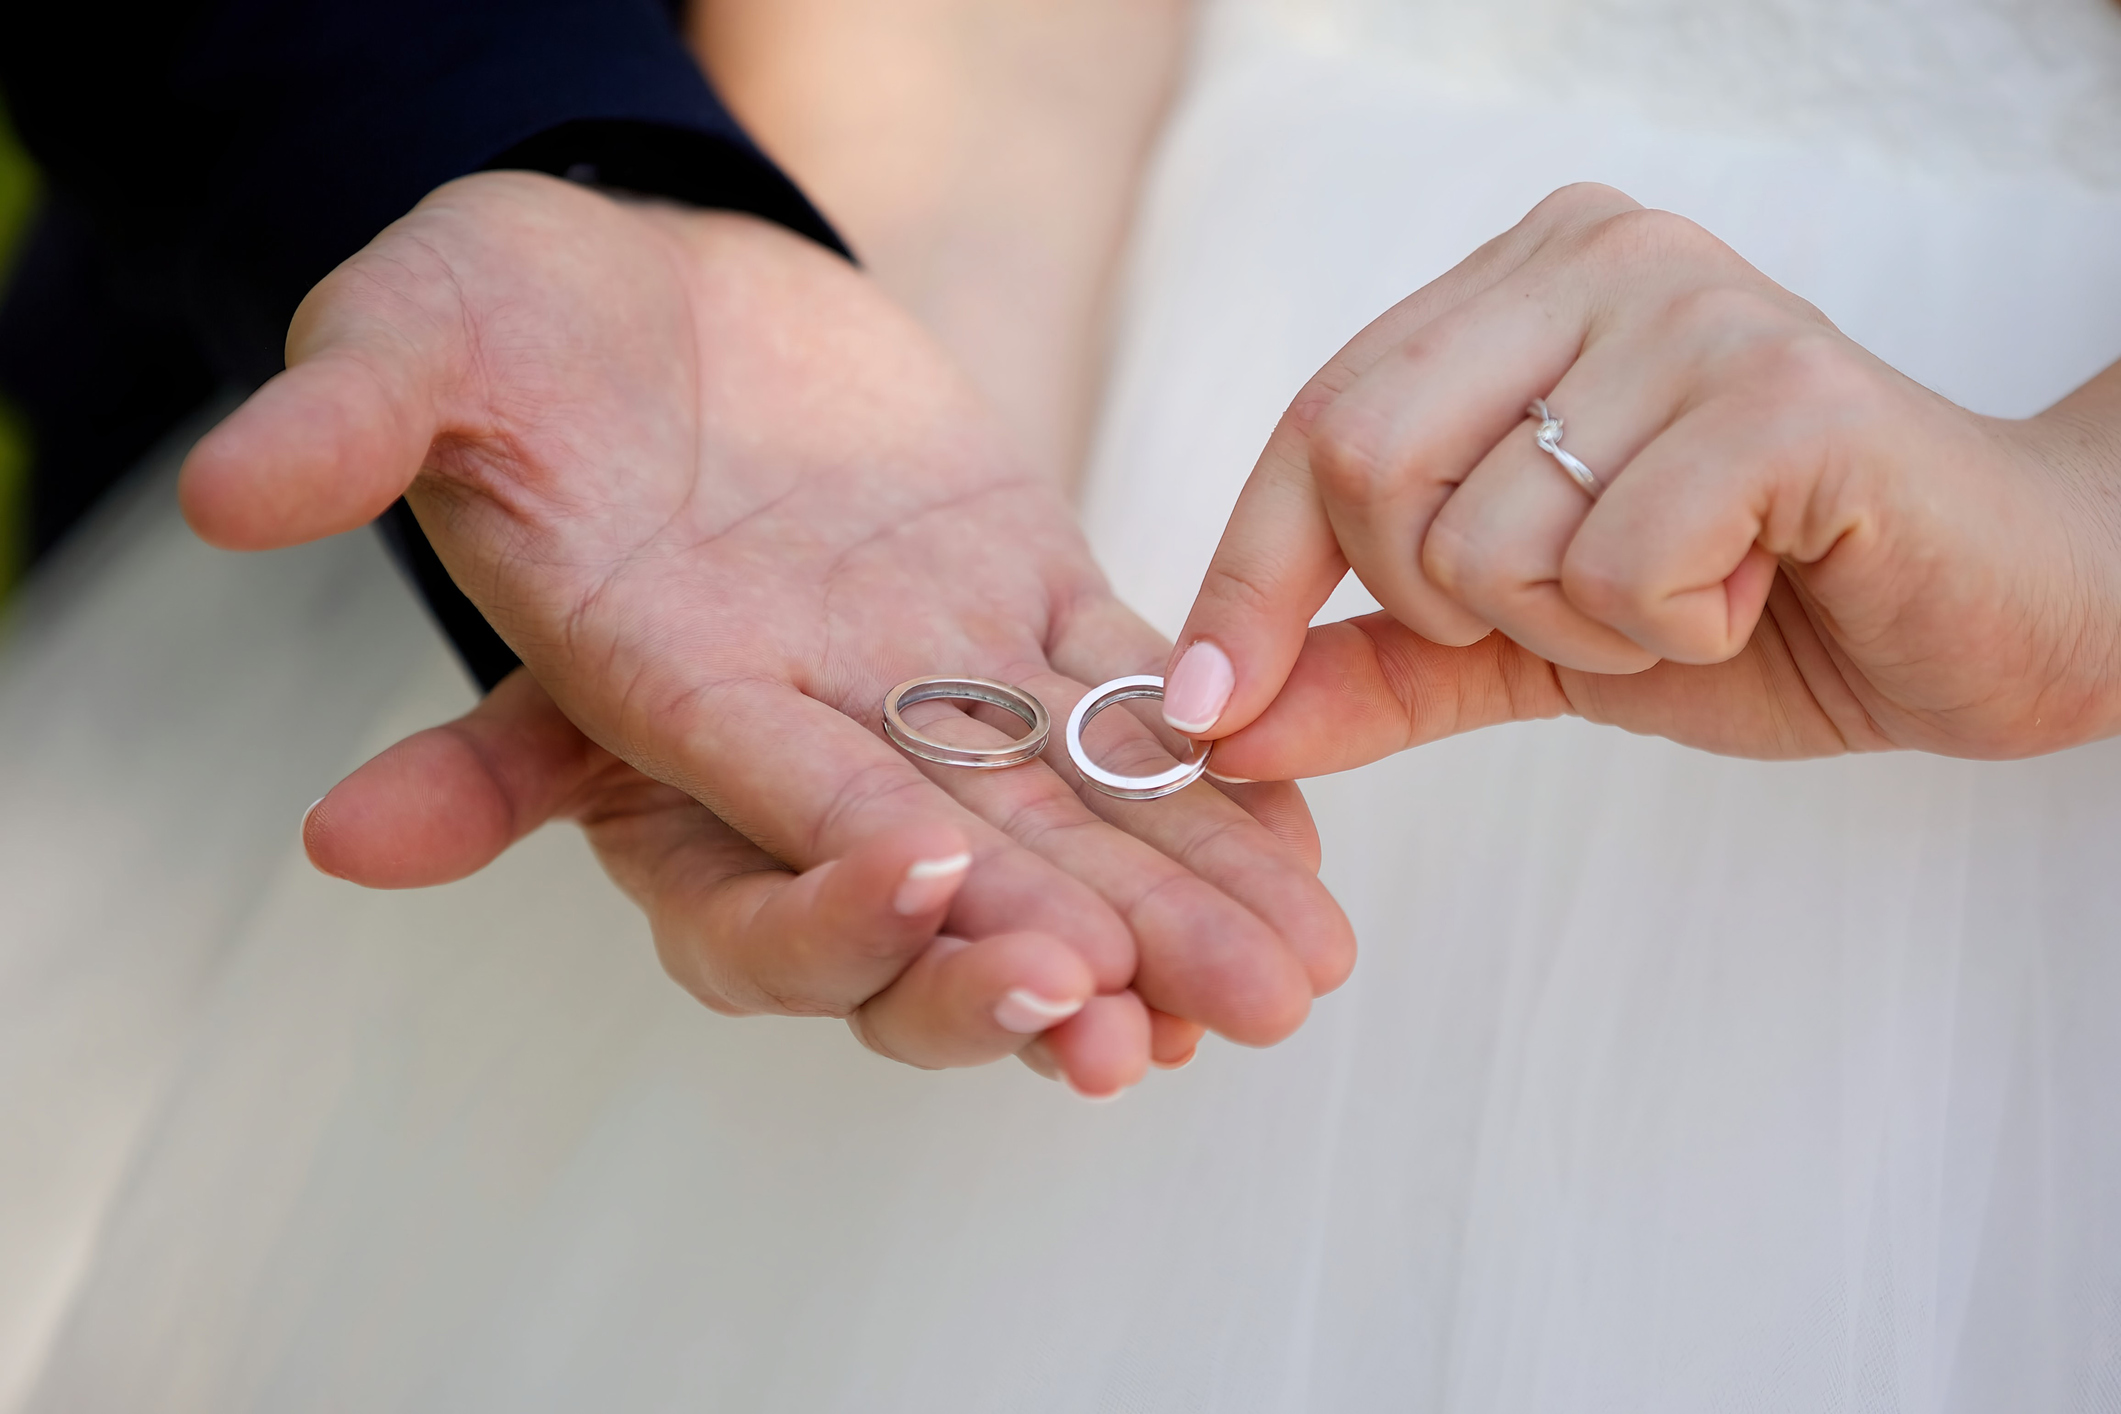 Woman's theory about who should change their name in marriage goes viral